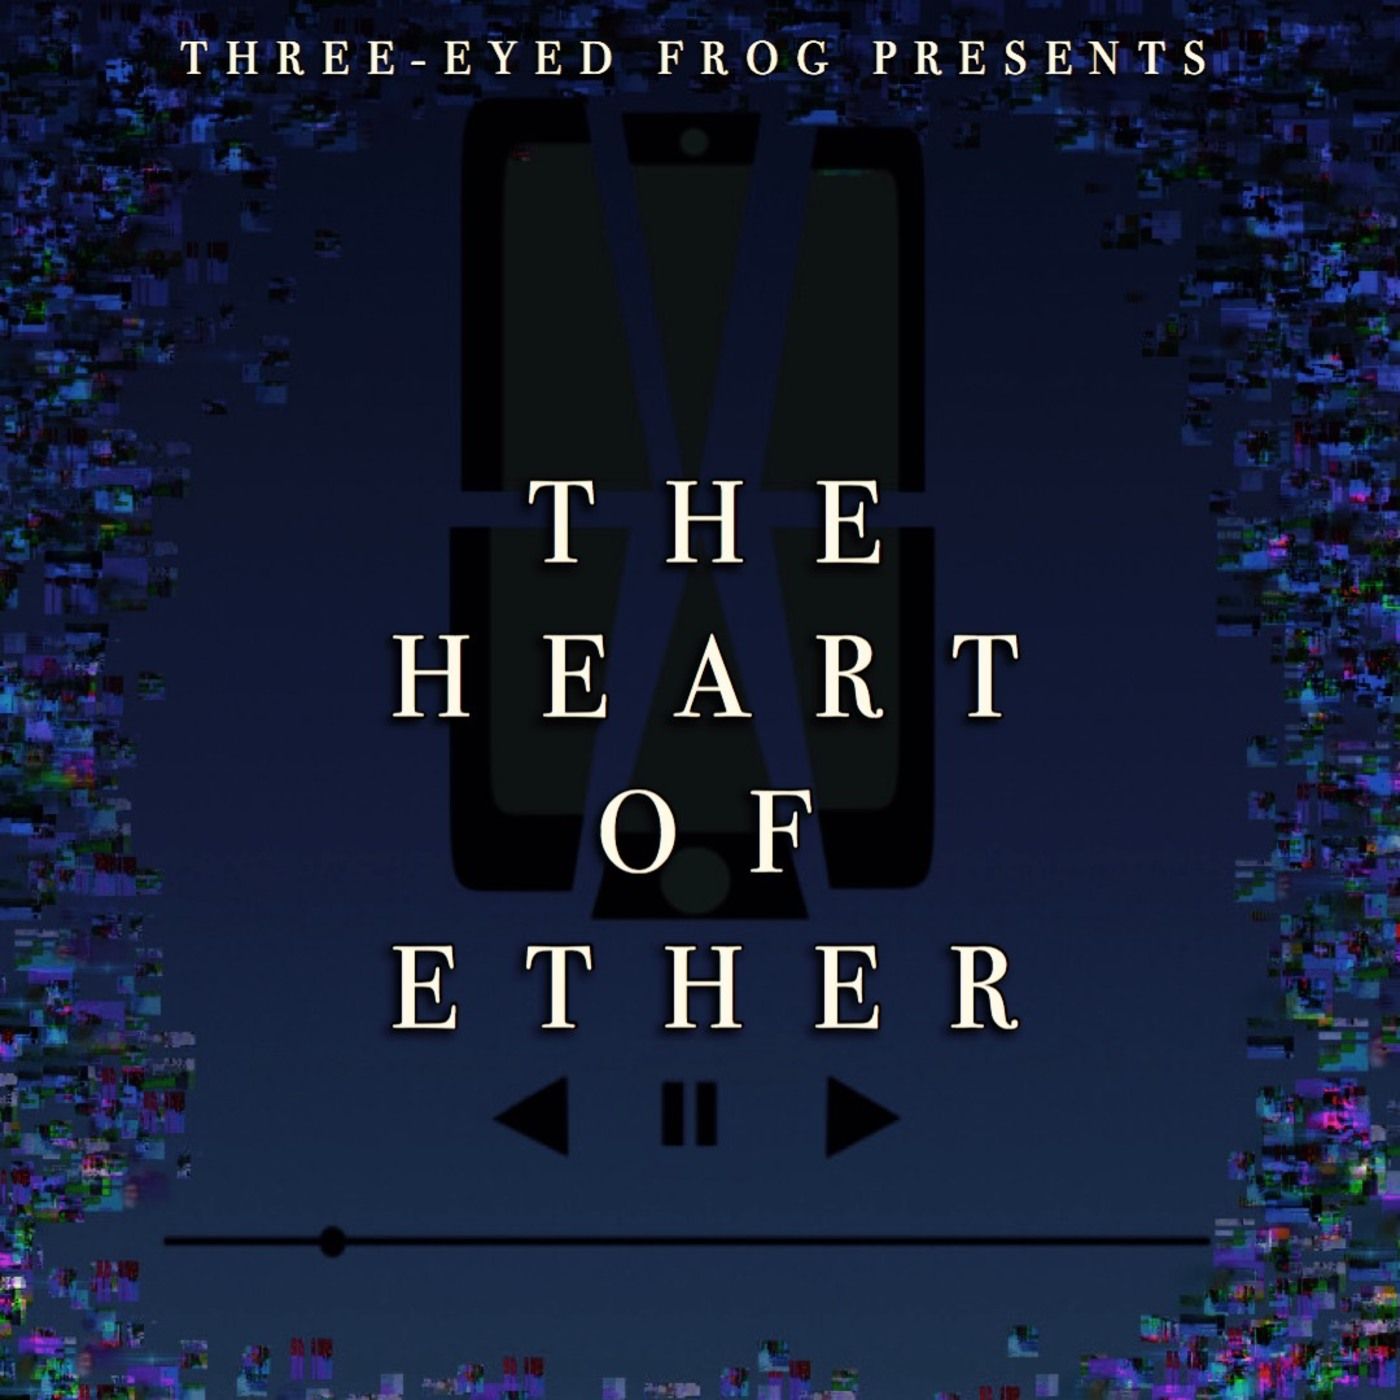 The Heart of Ether